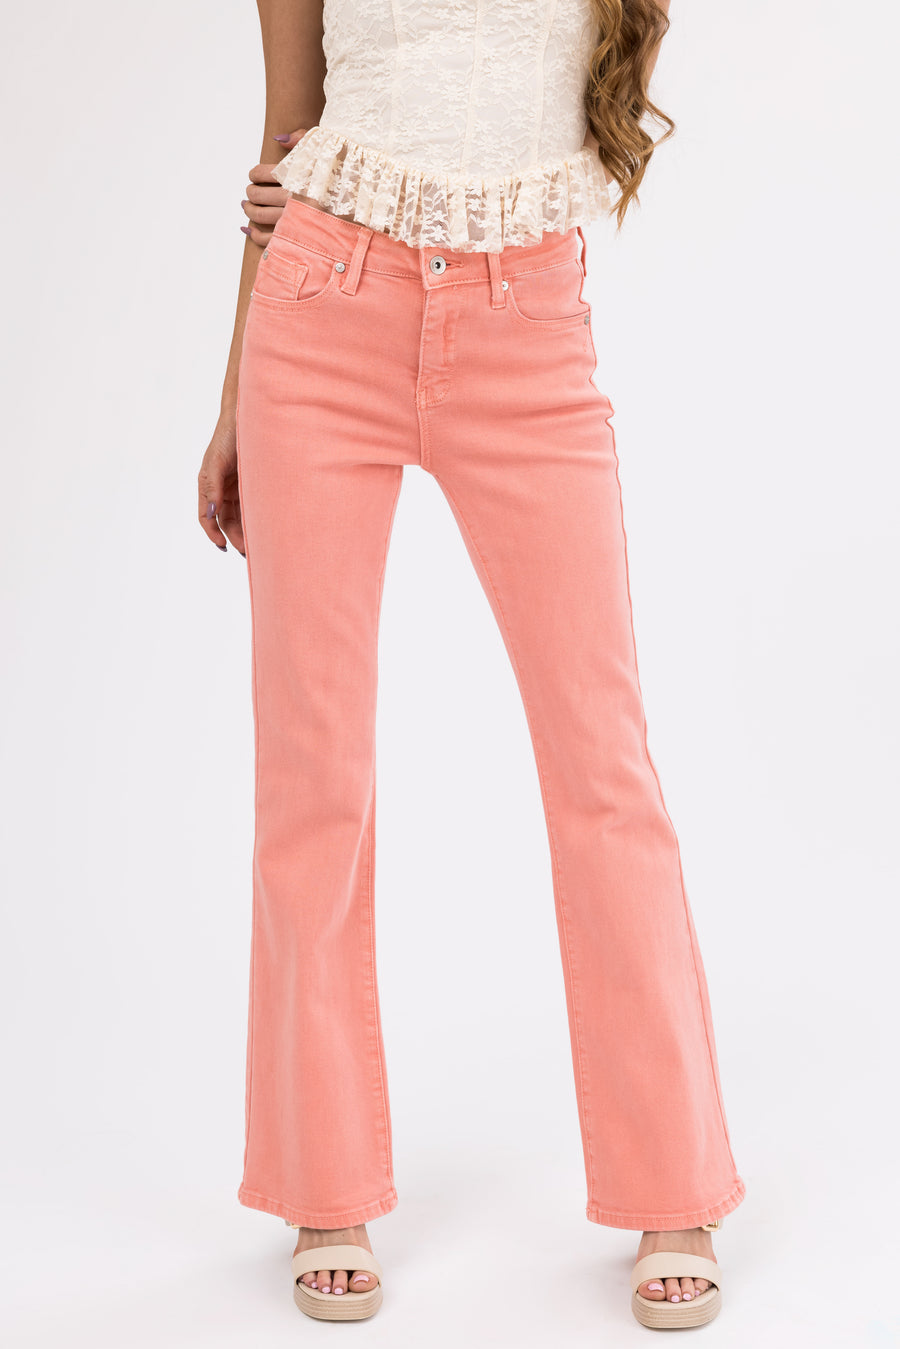 Special A Salmon Slim Bootcut Jeans